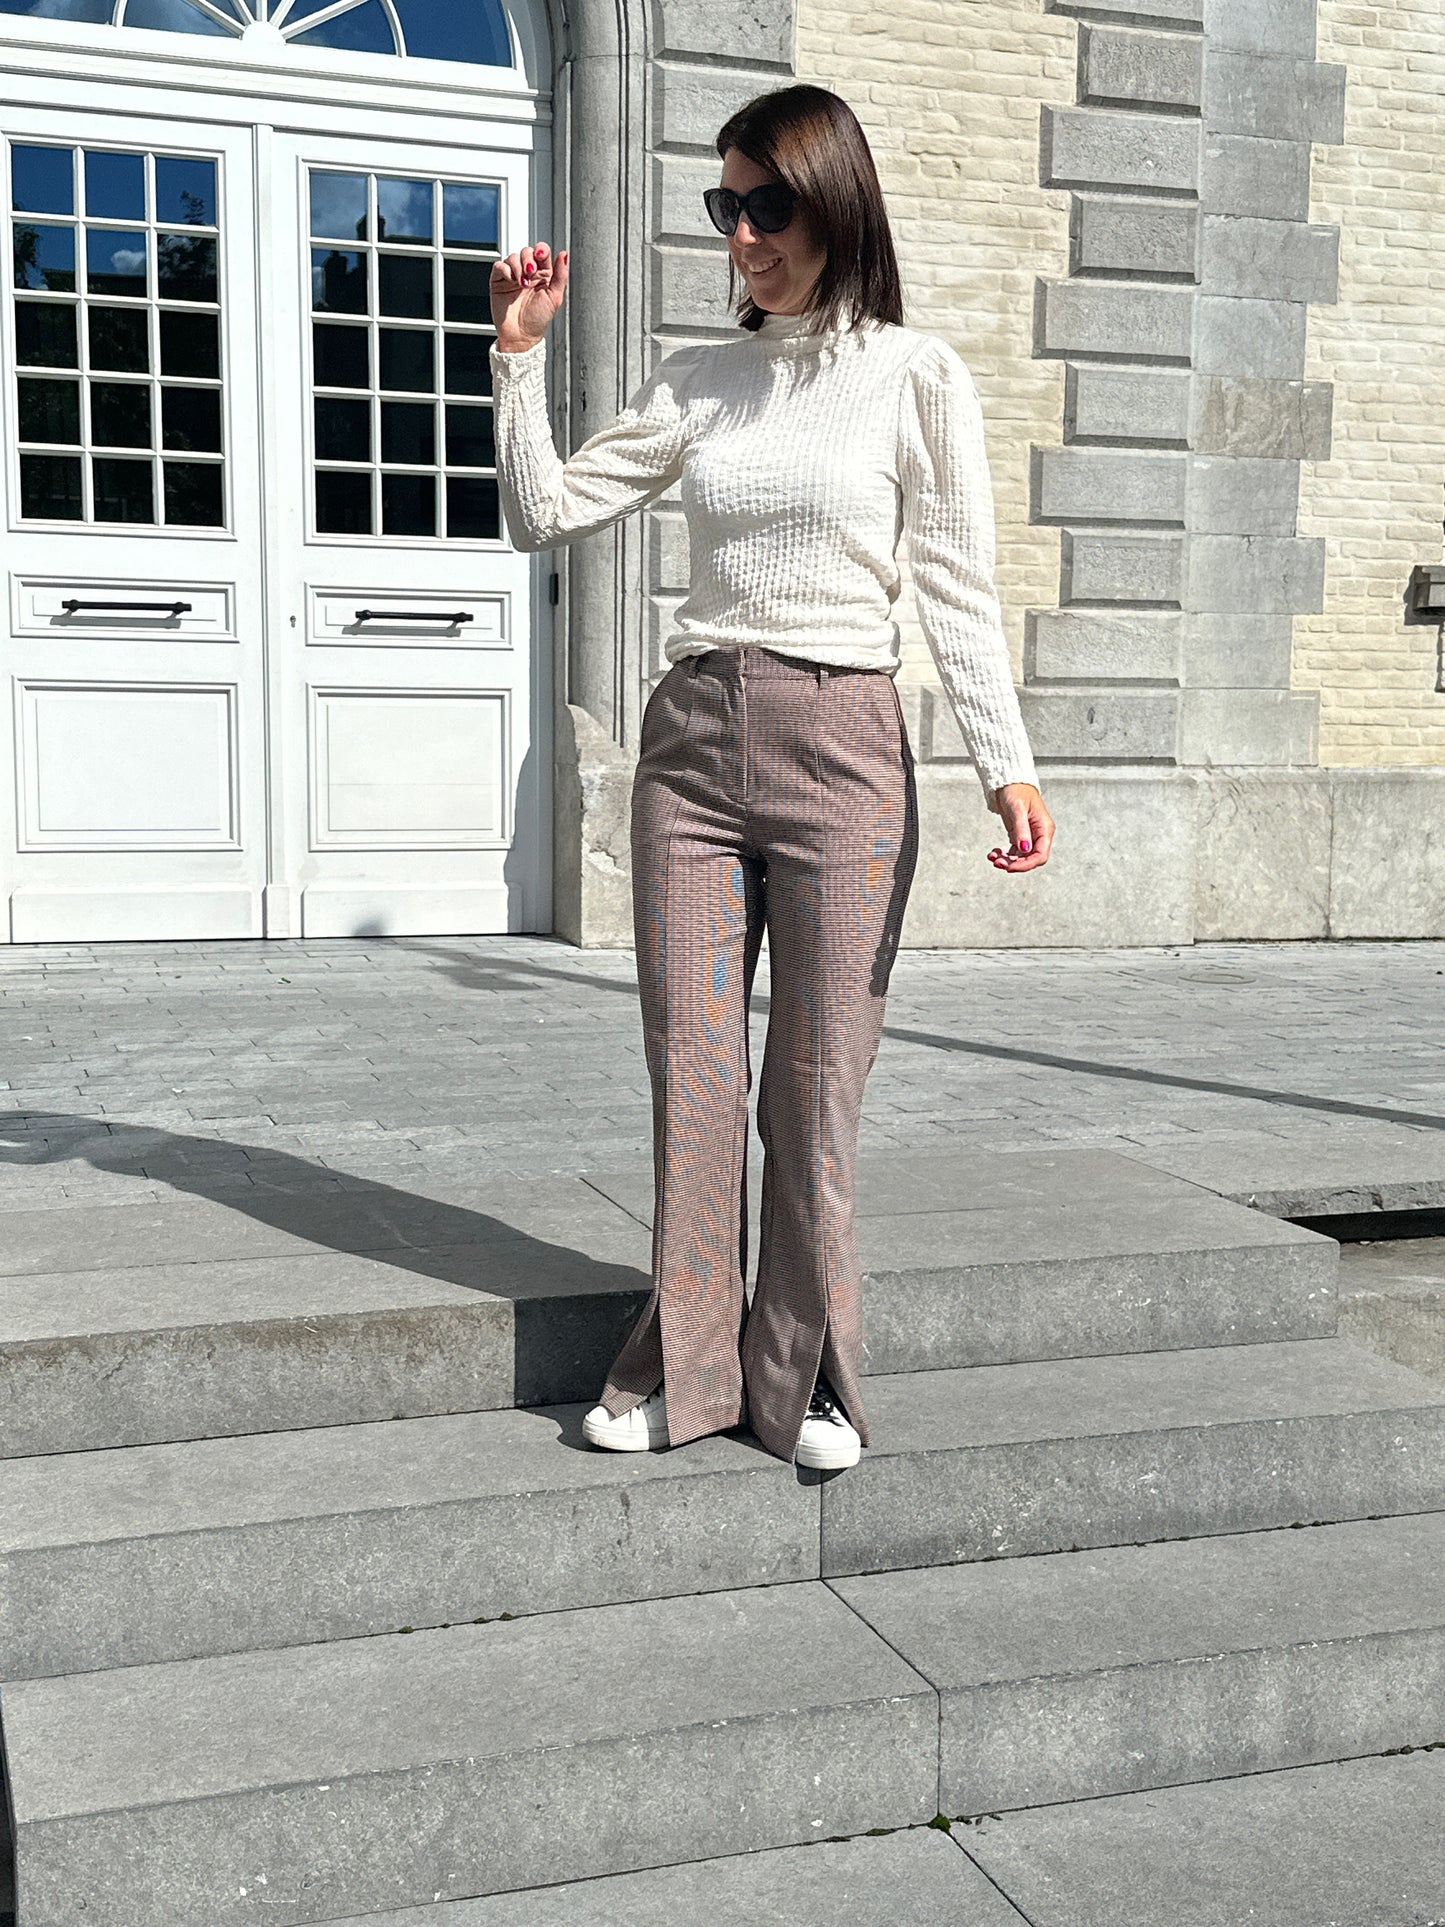 Flared trousers